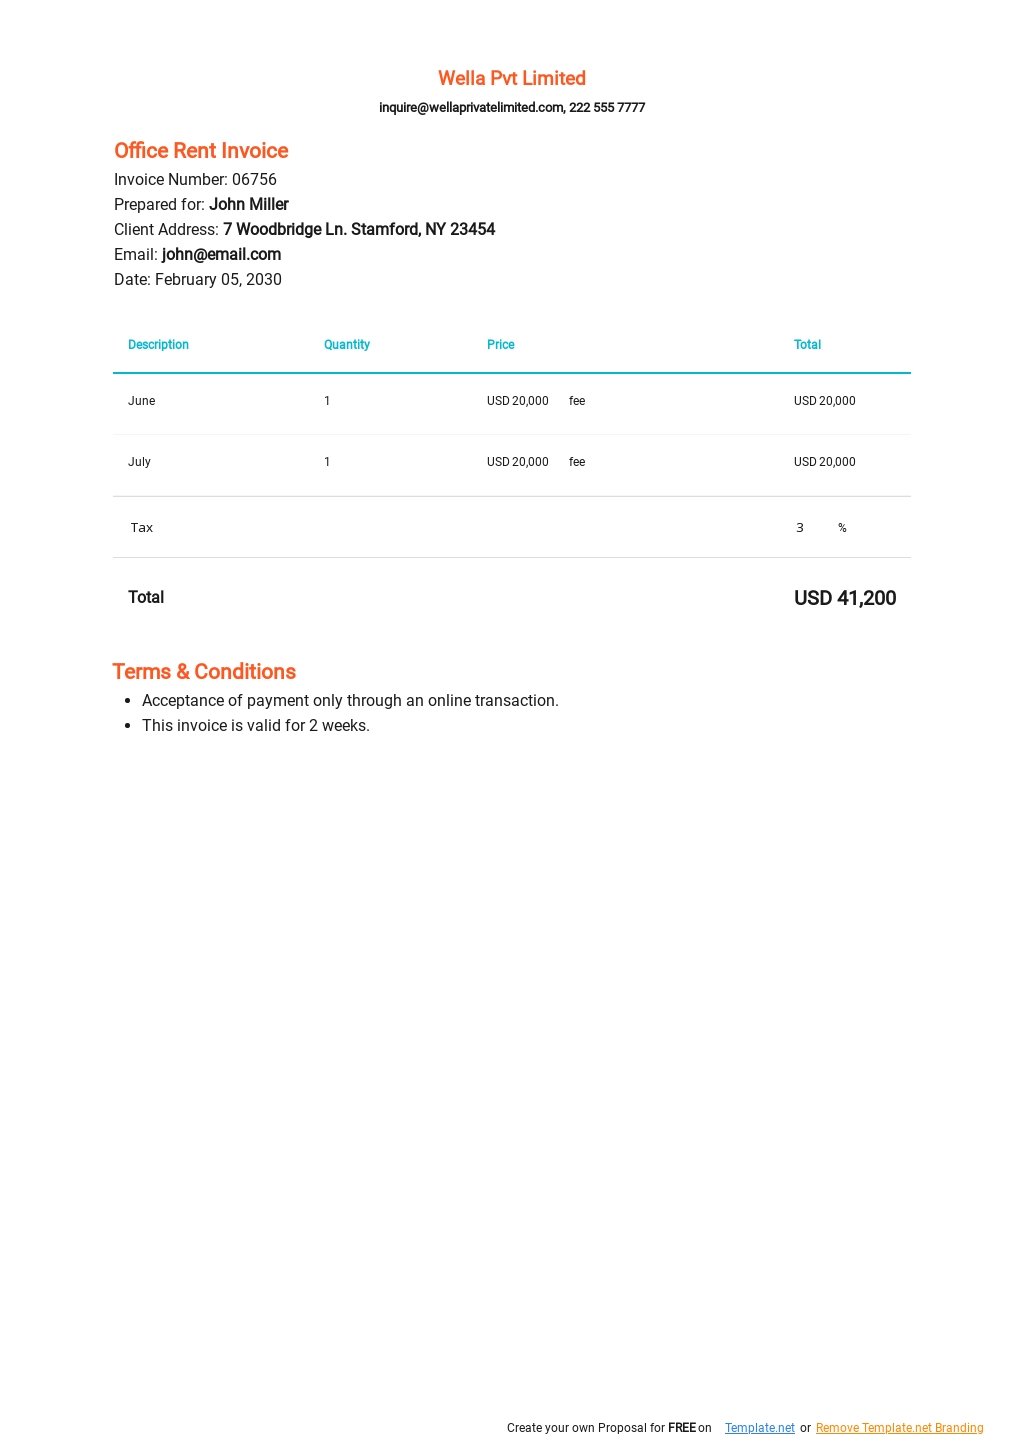 Office Rent Invoice Format Template.jpe